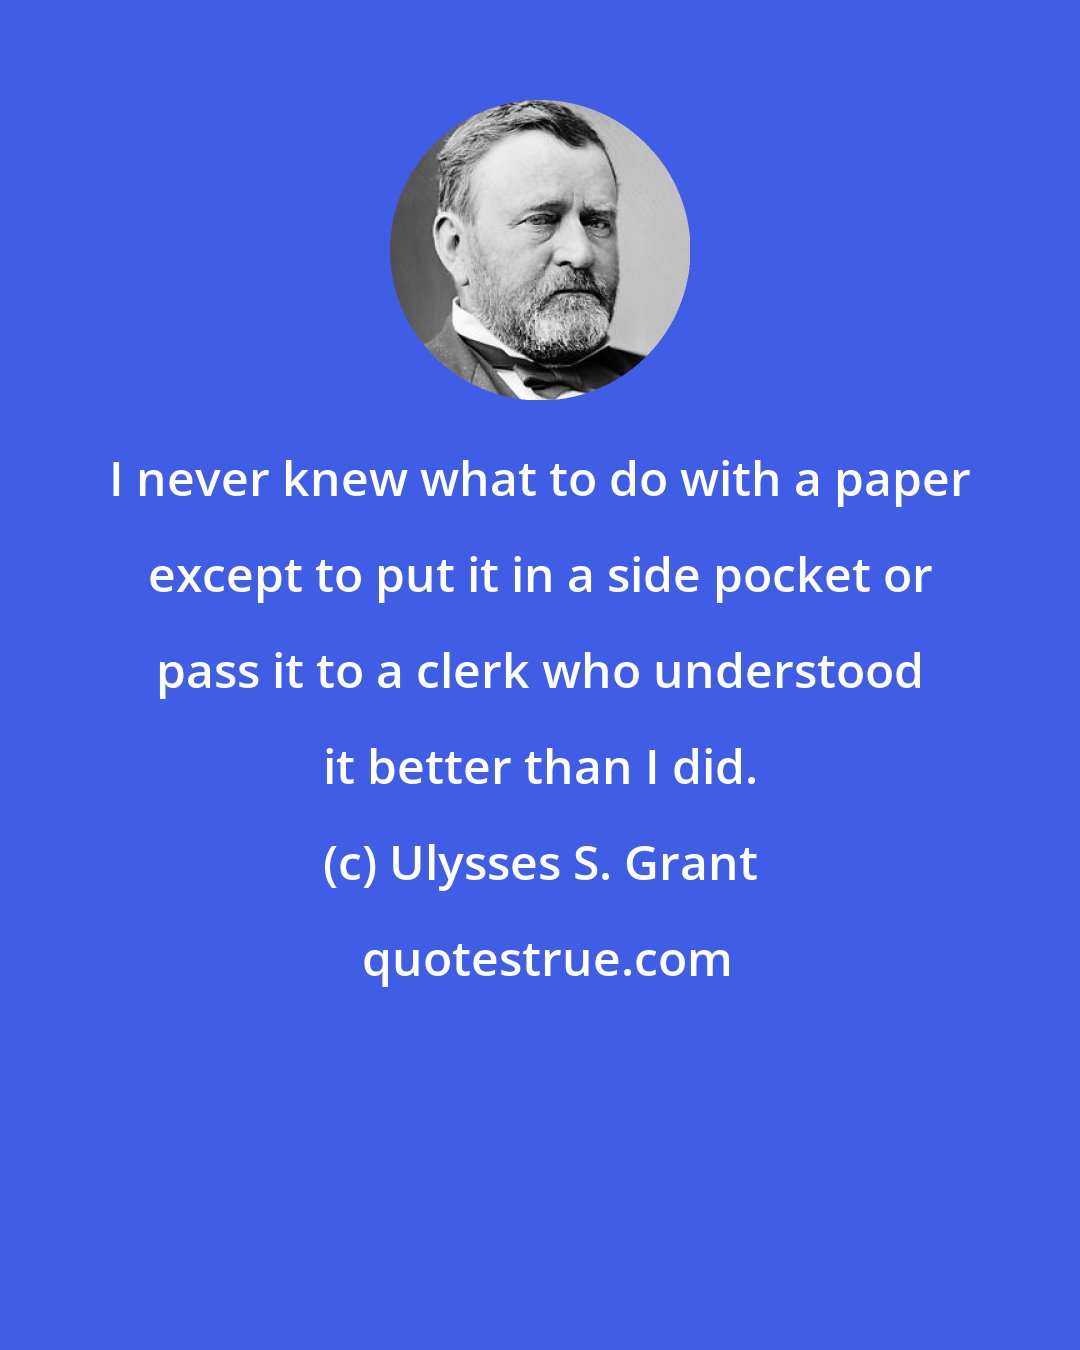 Ulysses S. Grant: I never knew what to do with a paper except to put it in a side pocket or pass it to a clerk who understood it better than I did.